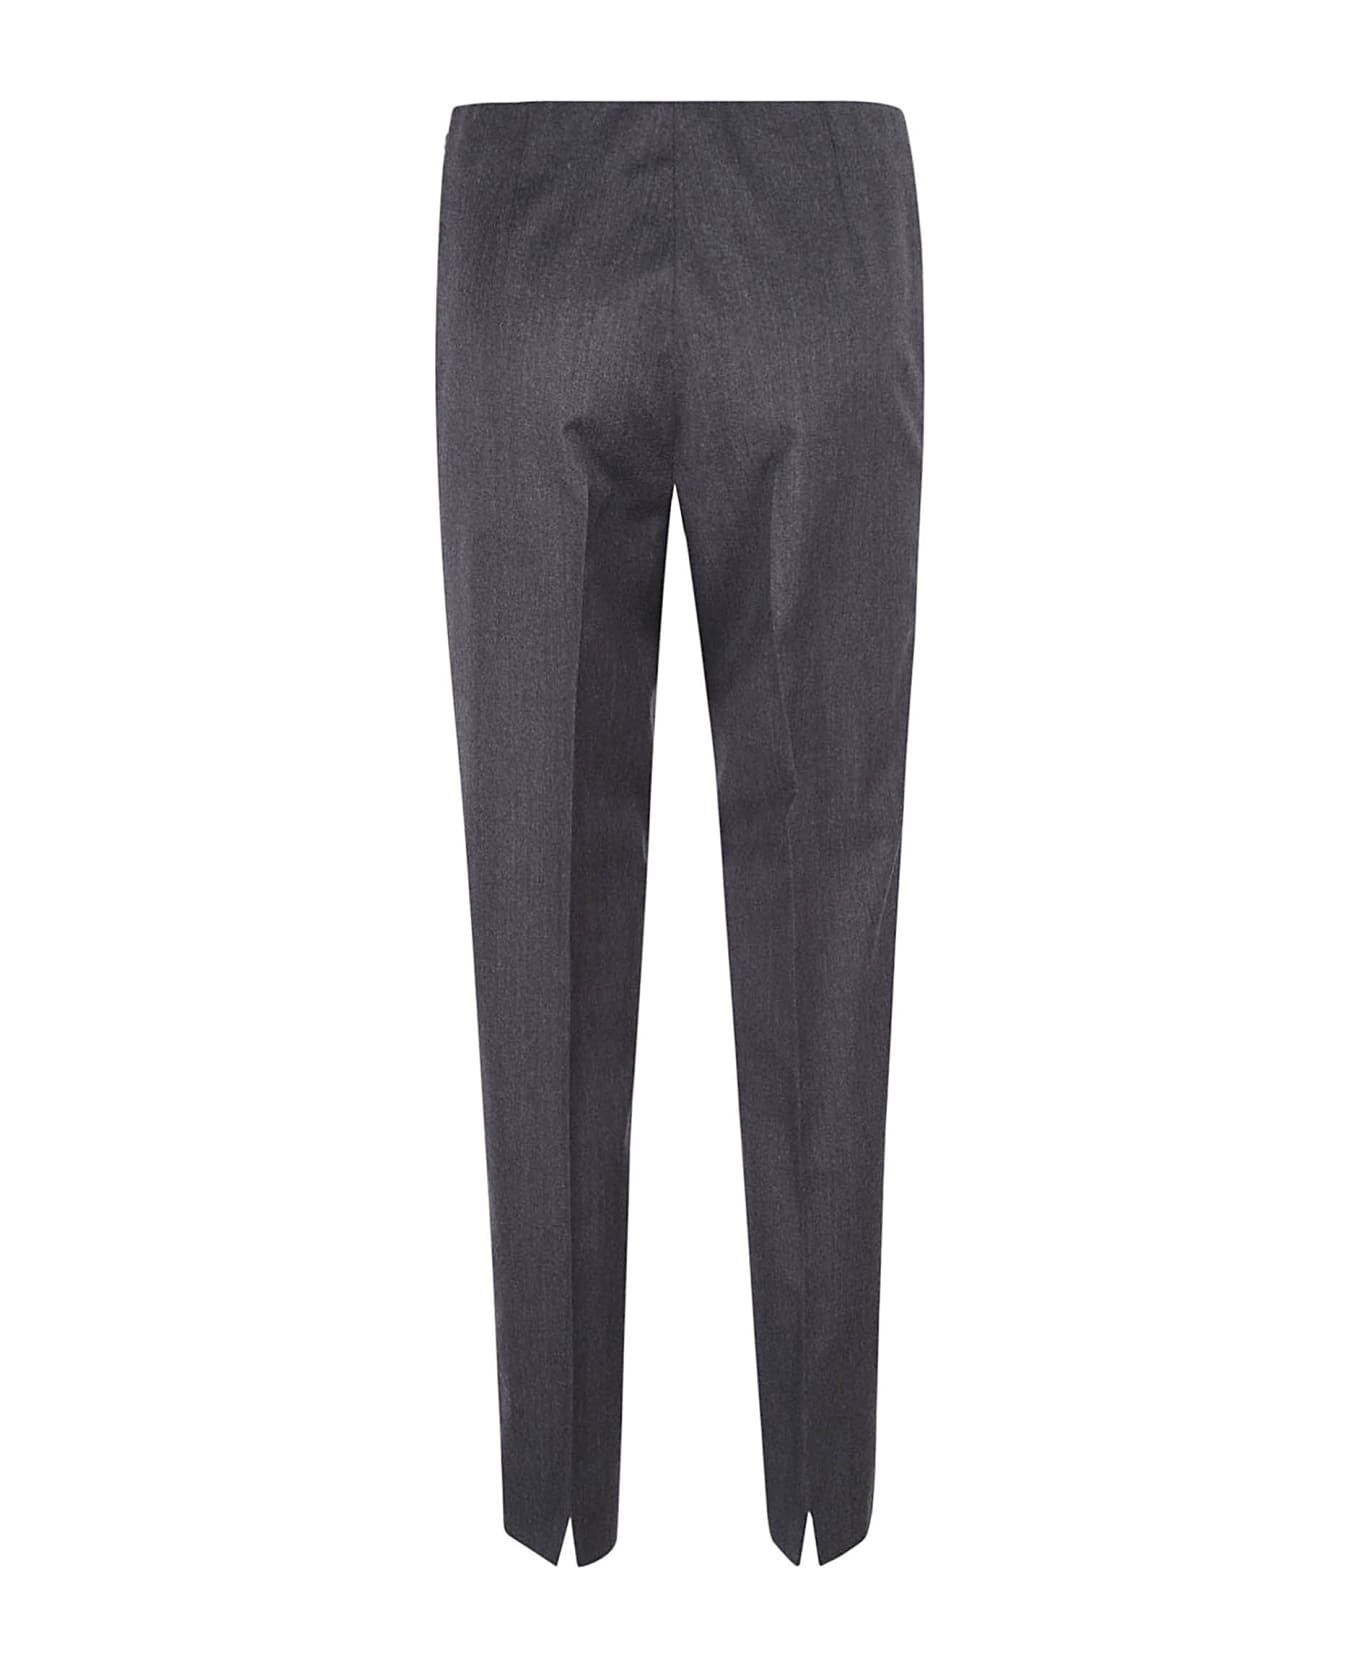 QL2 Trousers Anthracite - Anthracite